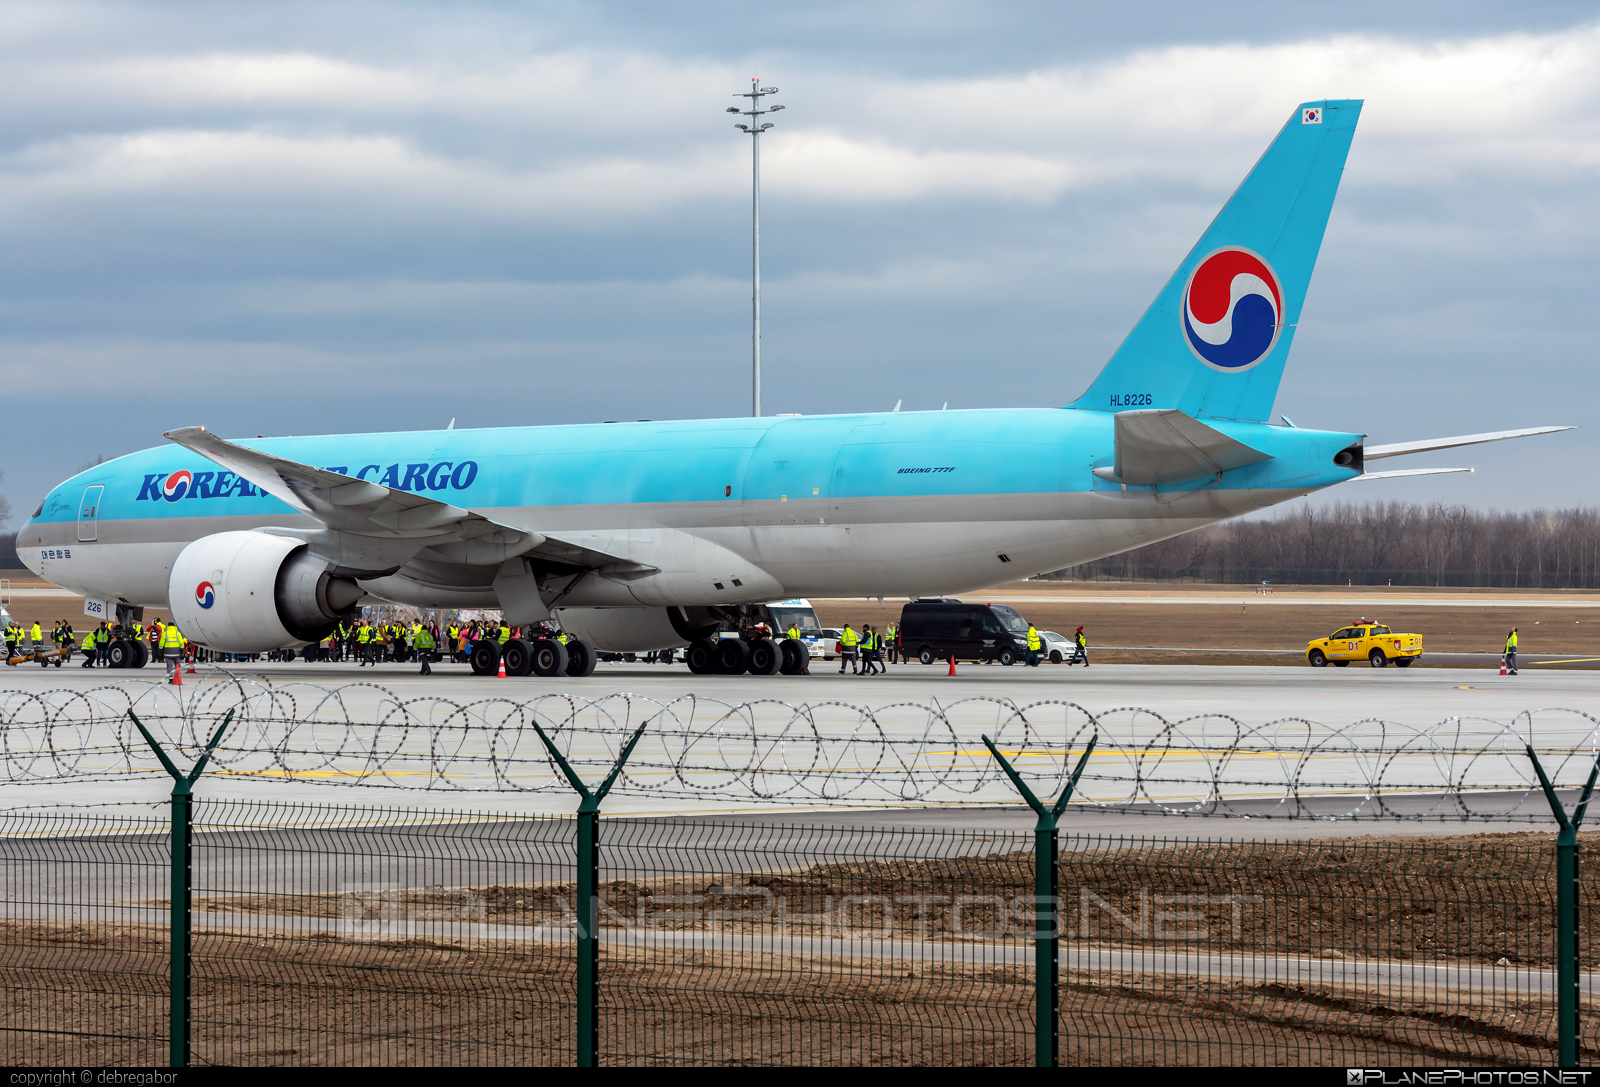 Boeing 777F - HL8226 operated by Korean Air Cargo #b777 #b777f #b777freighter #boeing #boeing777 #koreanair #koreanaircargo #tripleseven